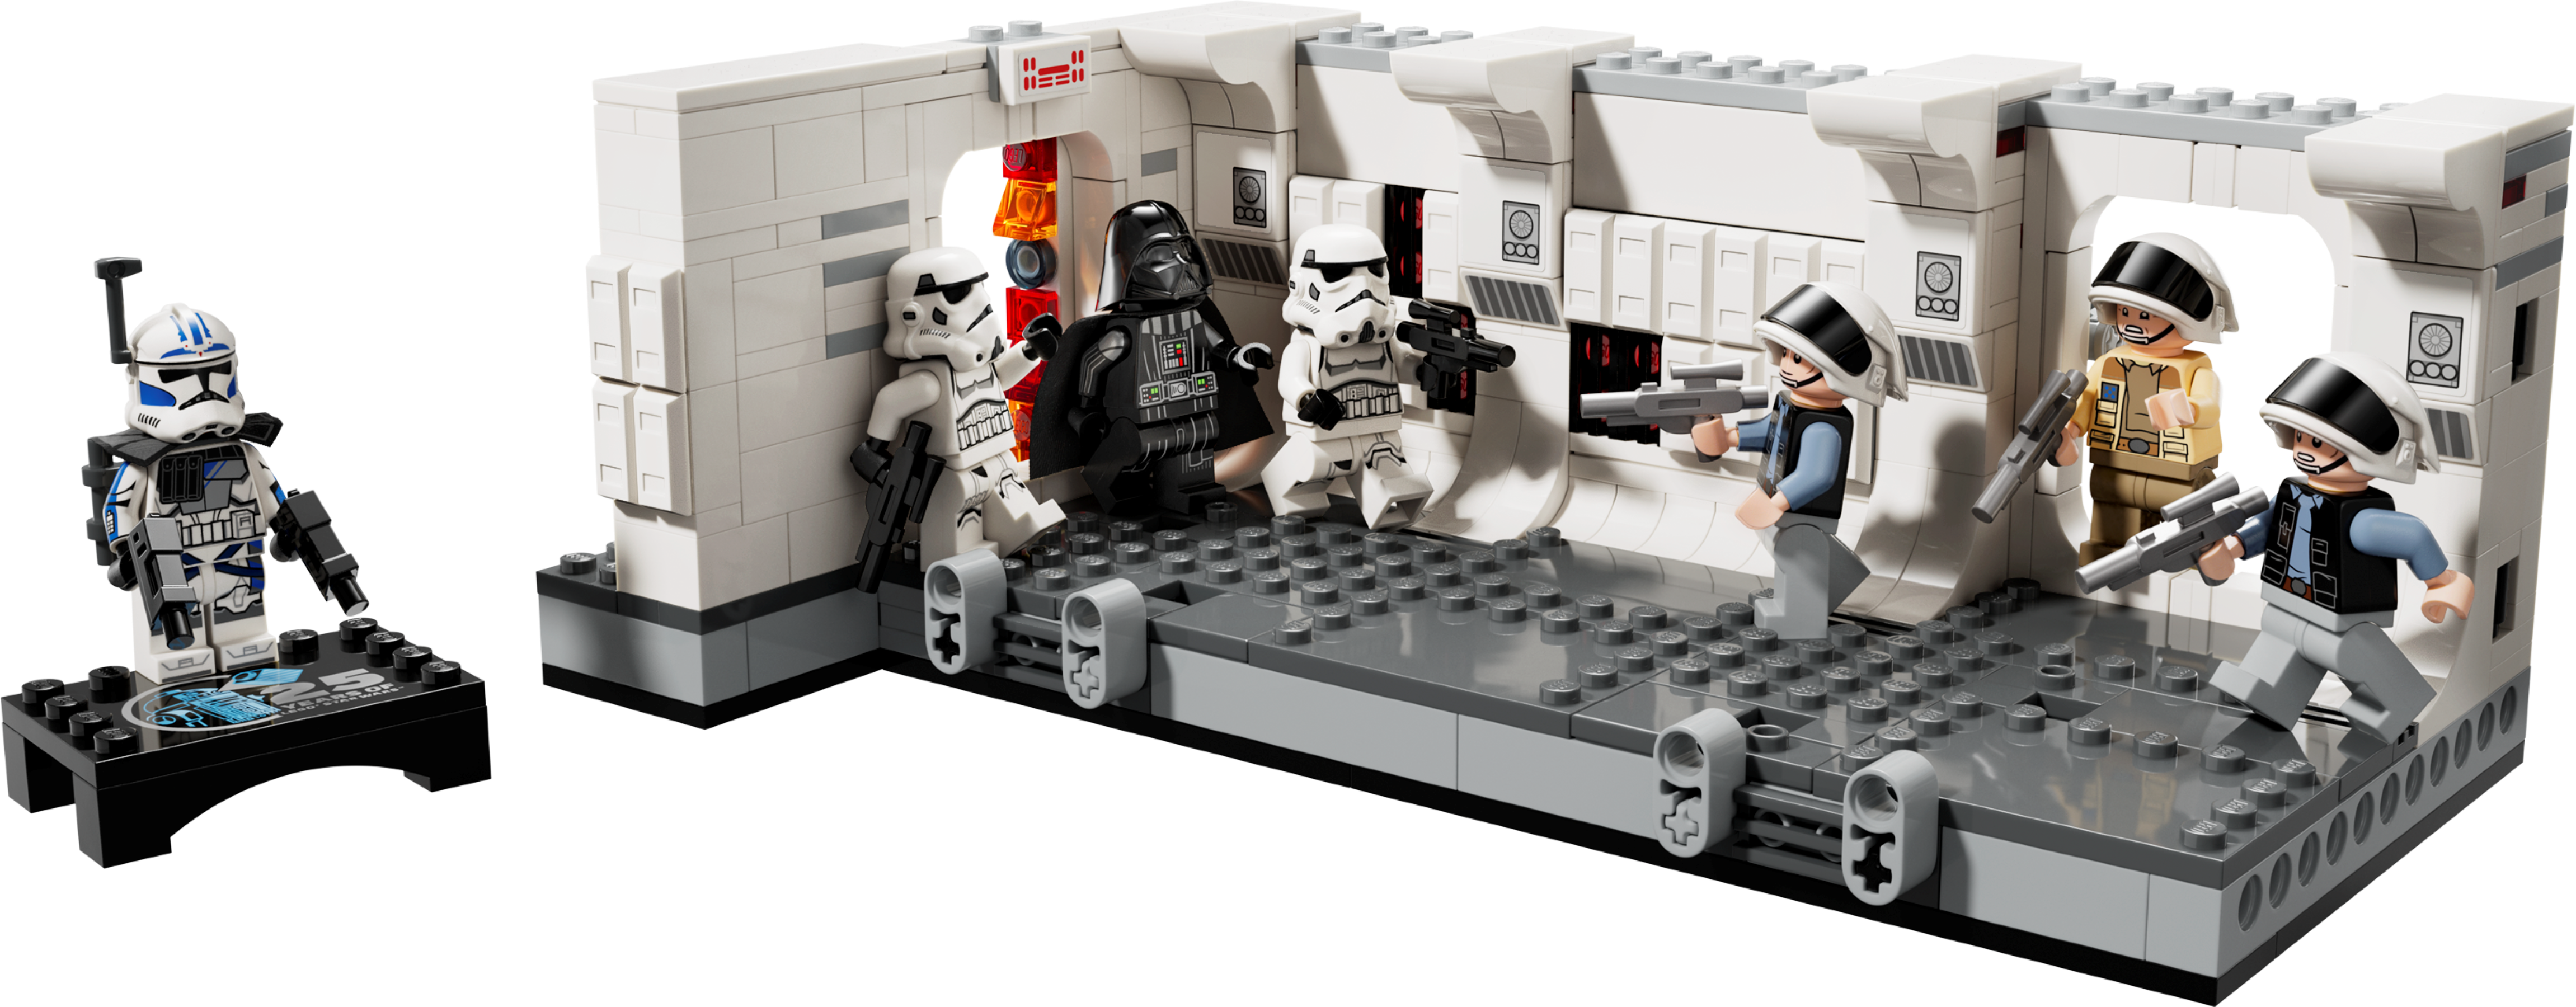 New LEGO Star Wars Sets Now Available - BricksFanz